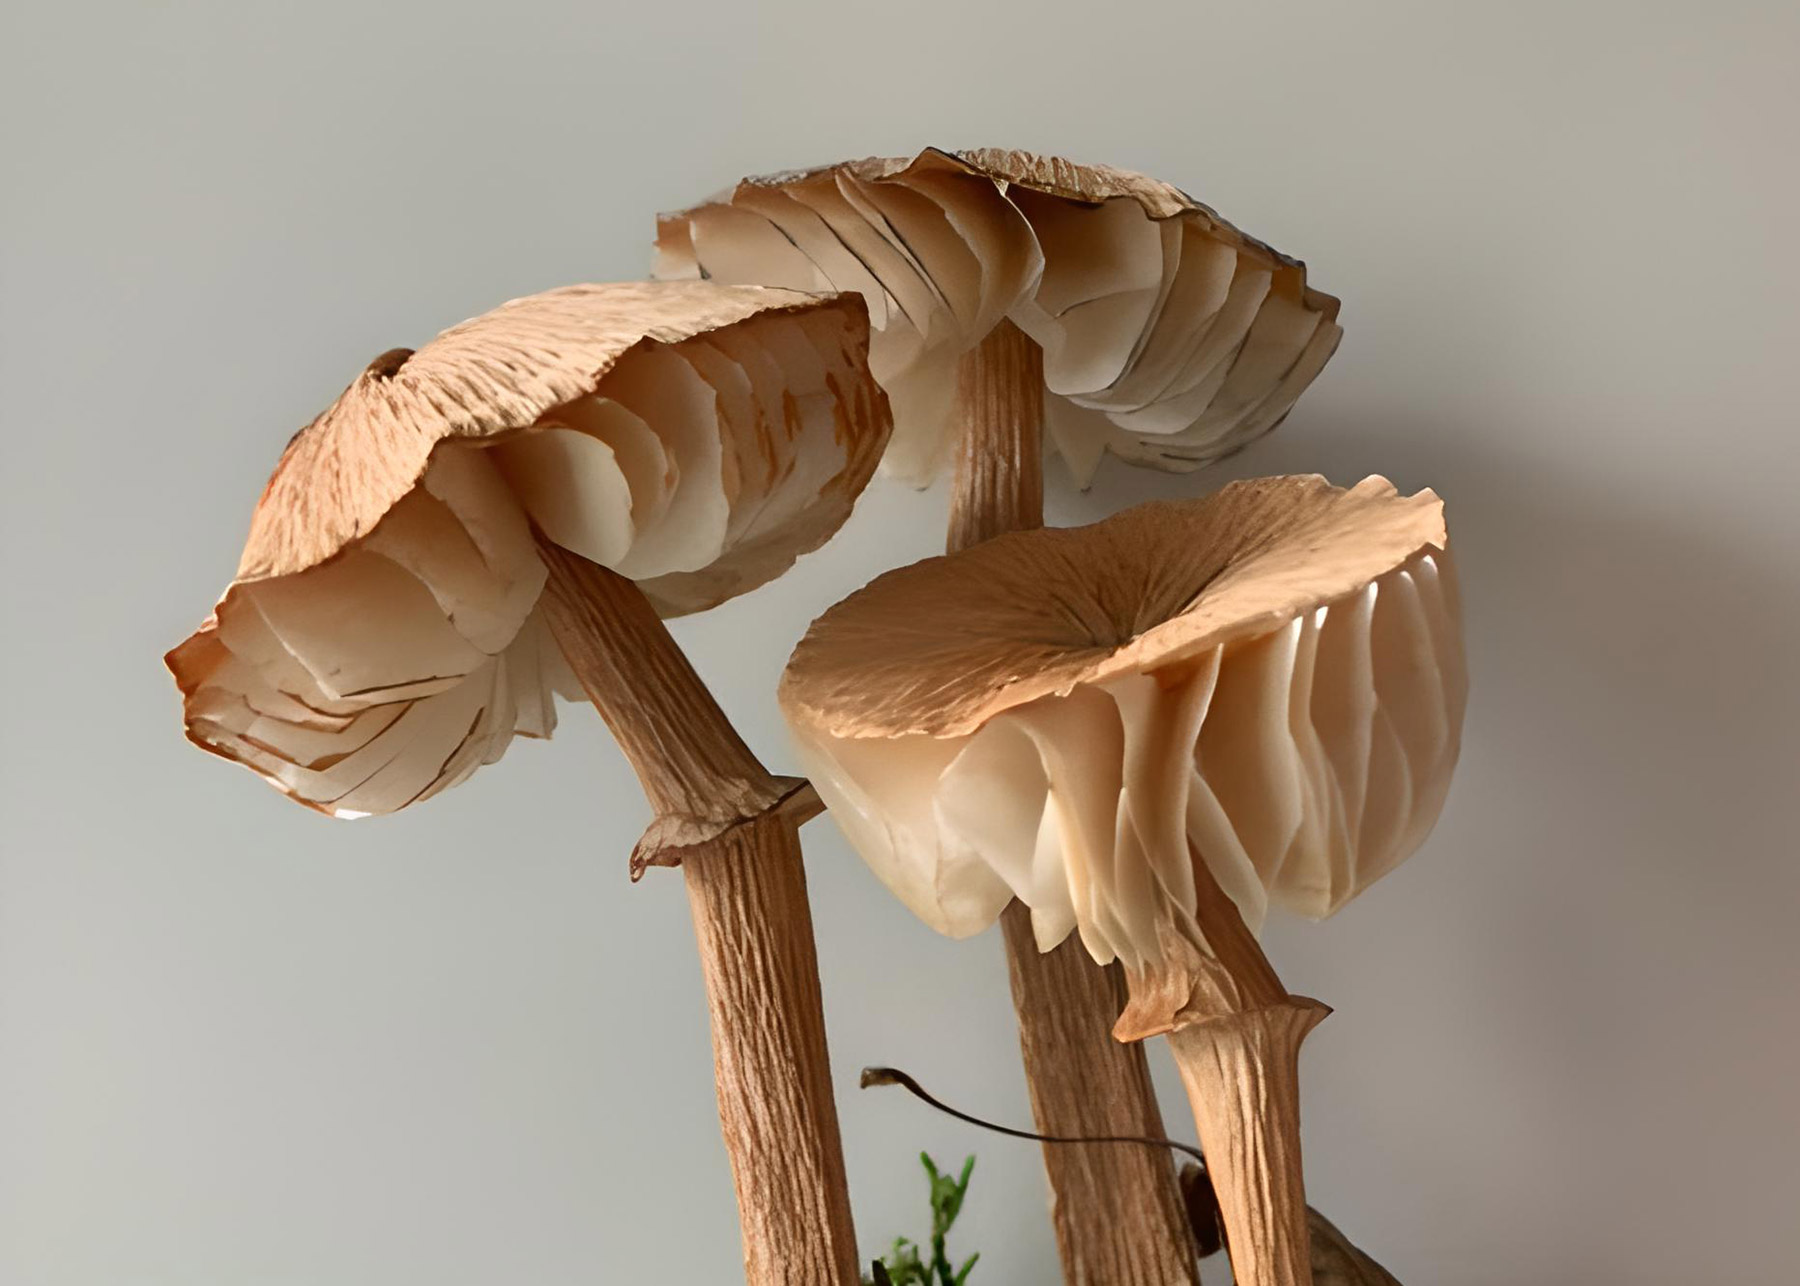 Three tan-colored paper mushrooms arranged together against a white background